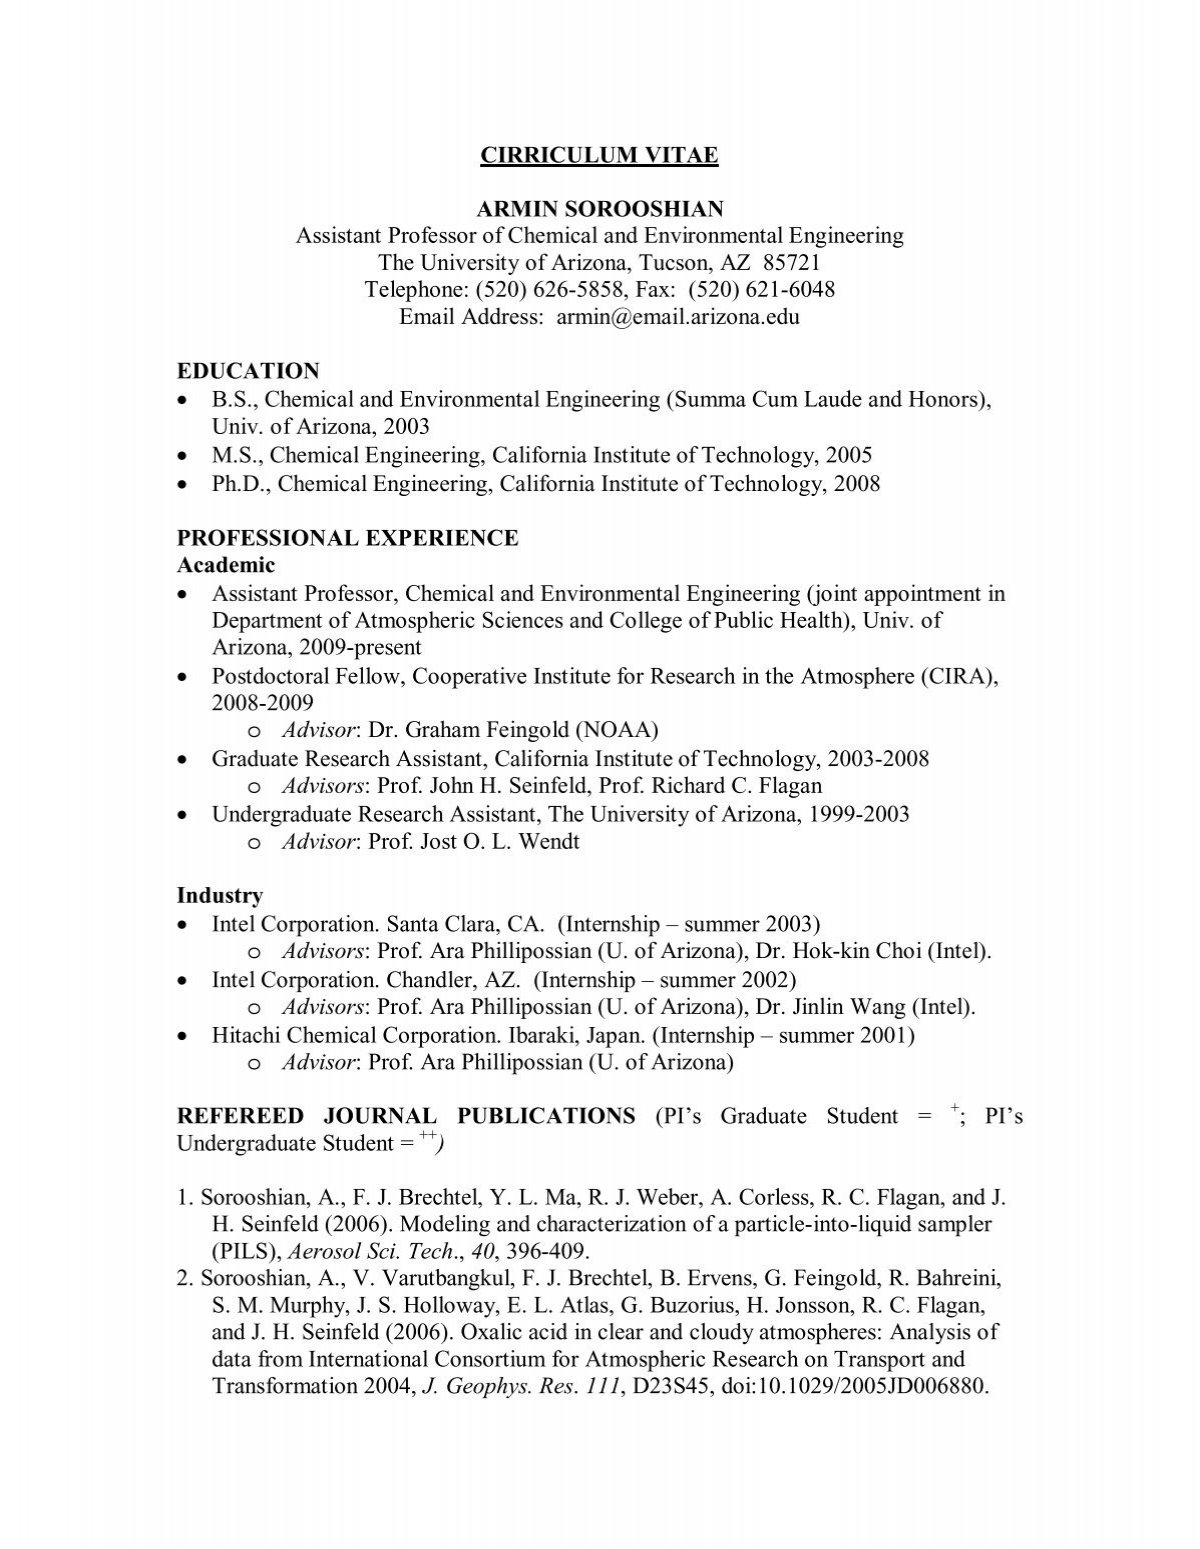 Cv Pdf Department Of Chemical And Environmental Engineering